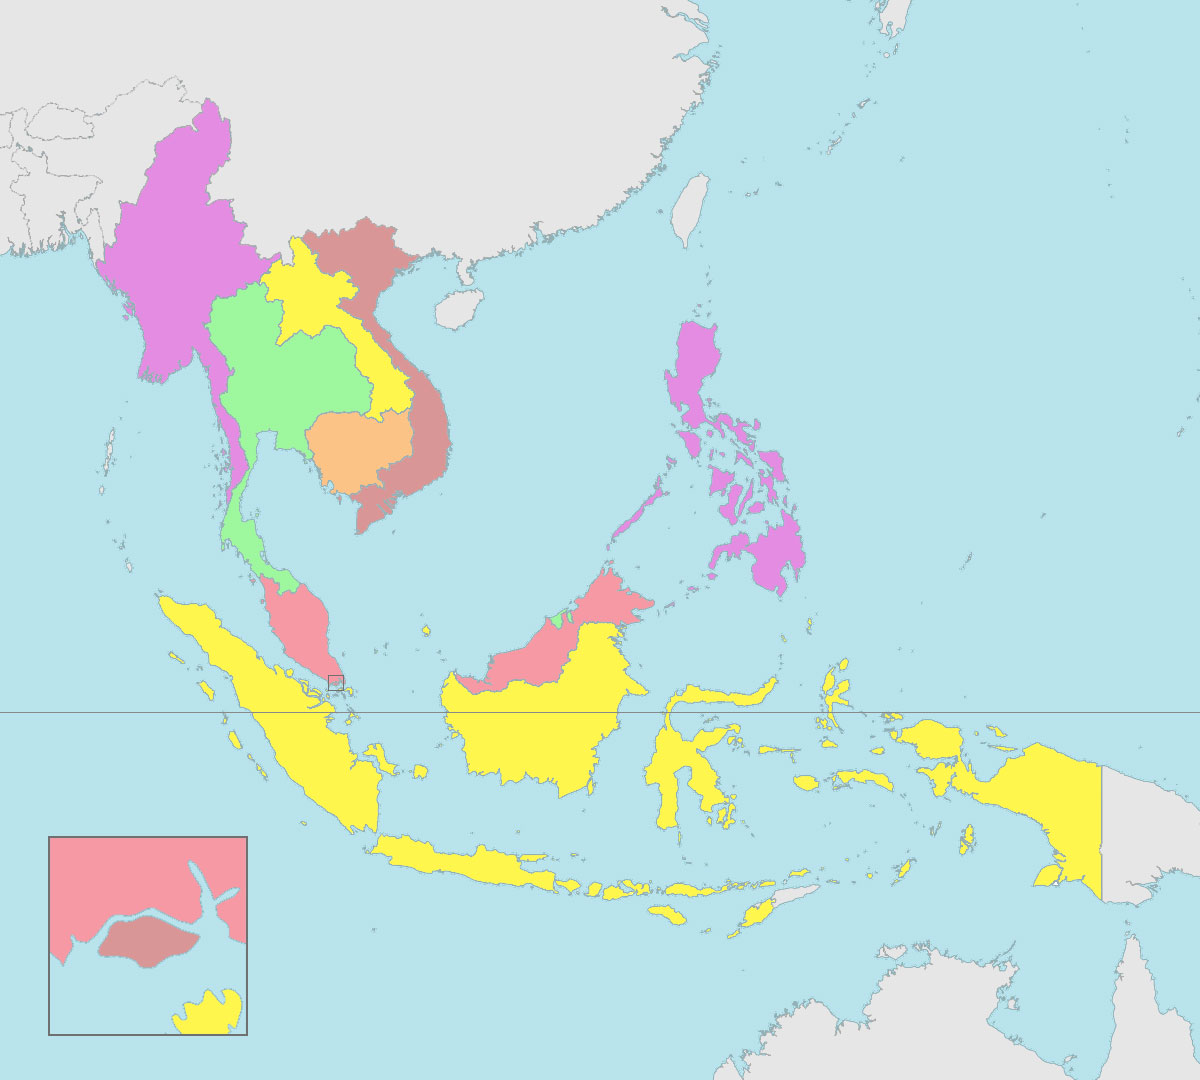 Blank map of ASEAN countries and capitals